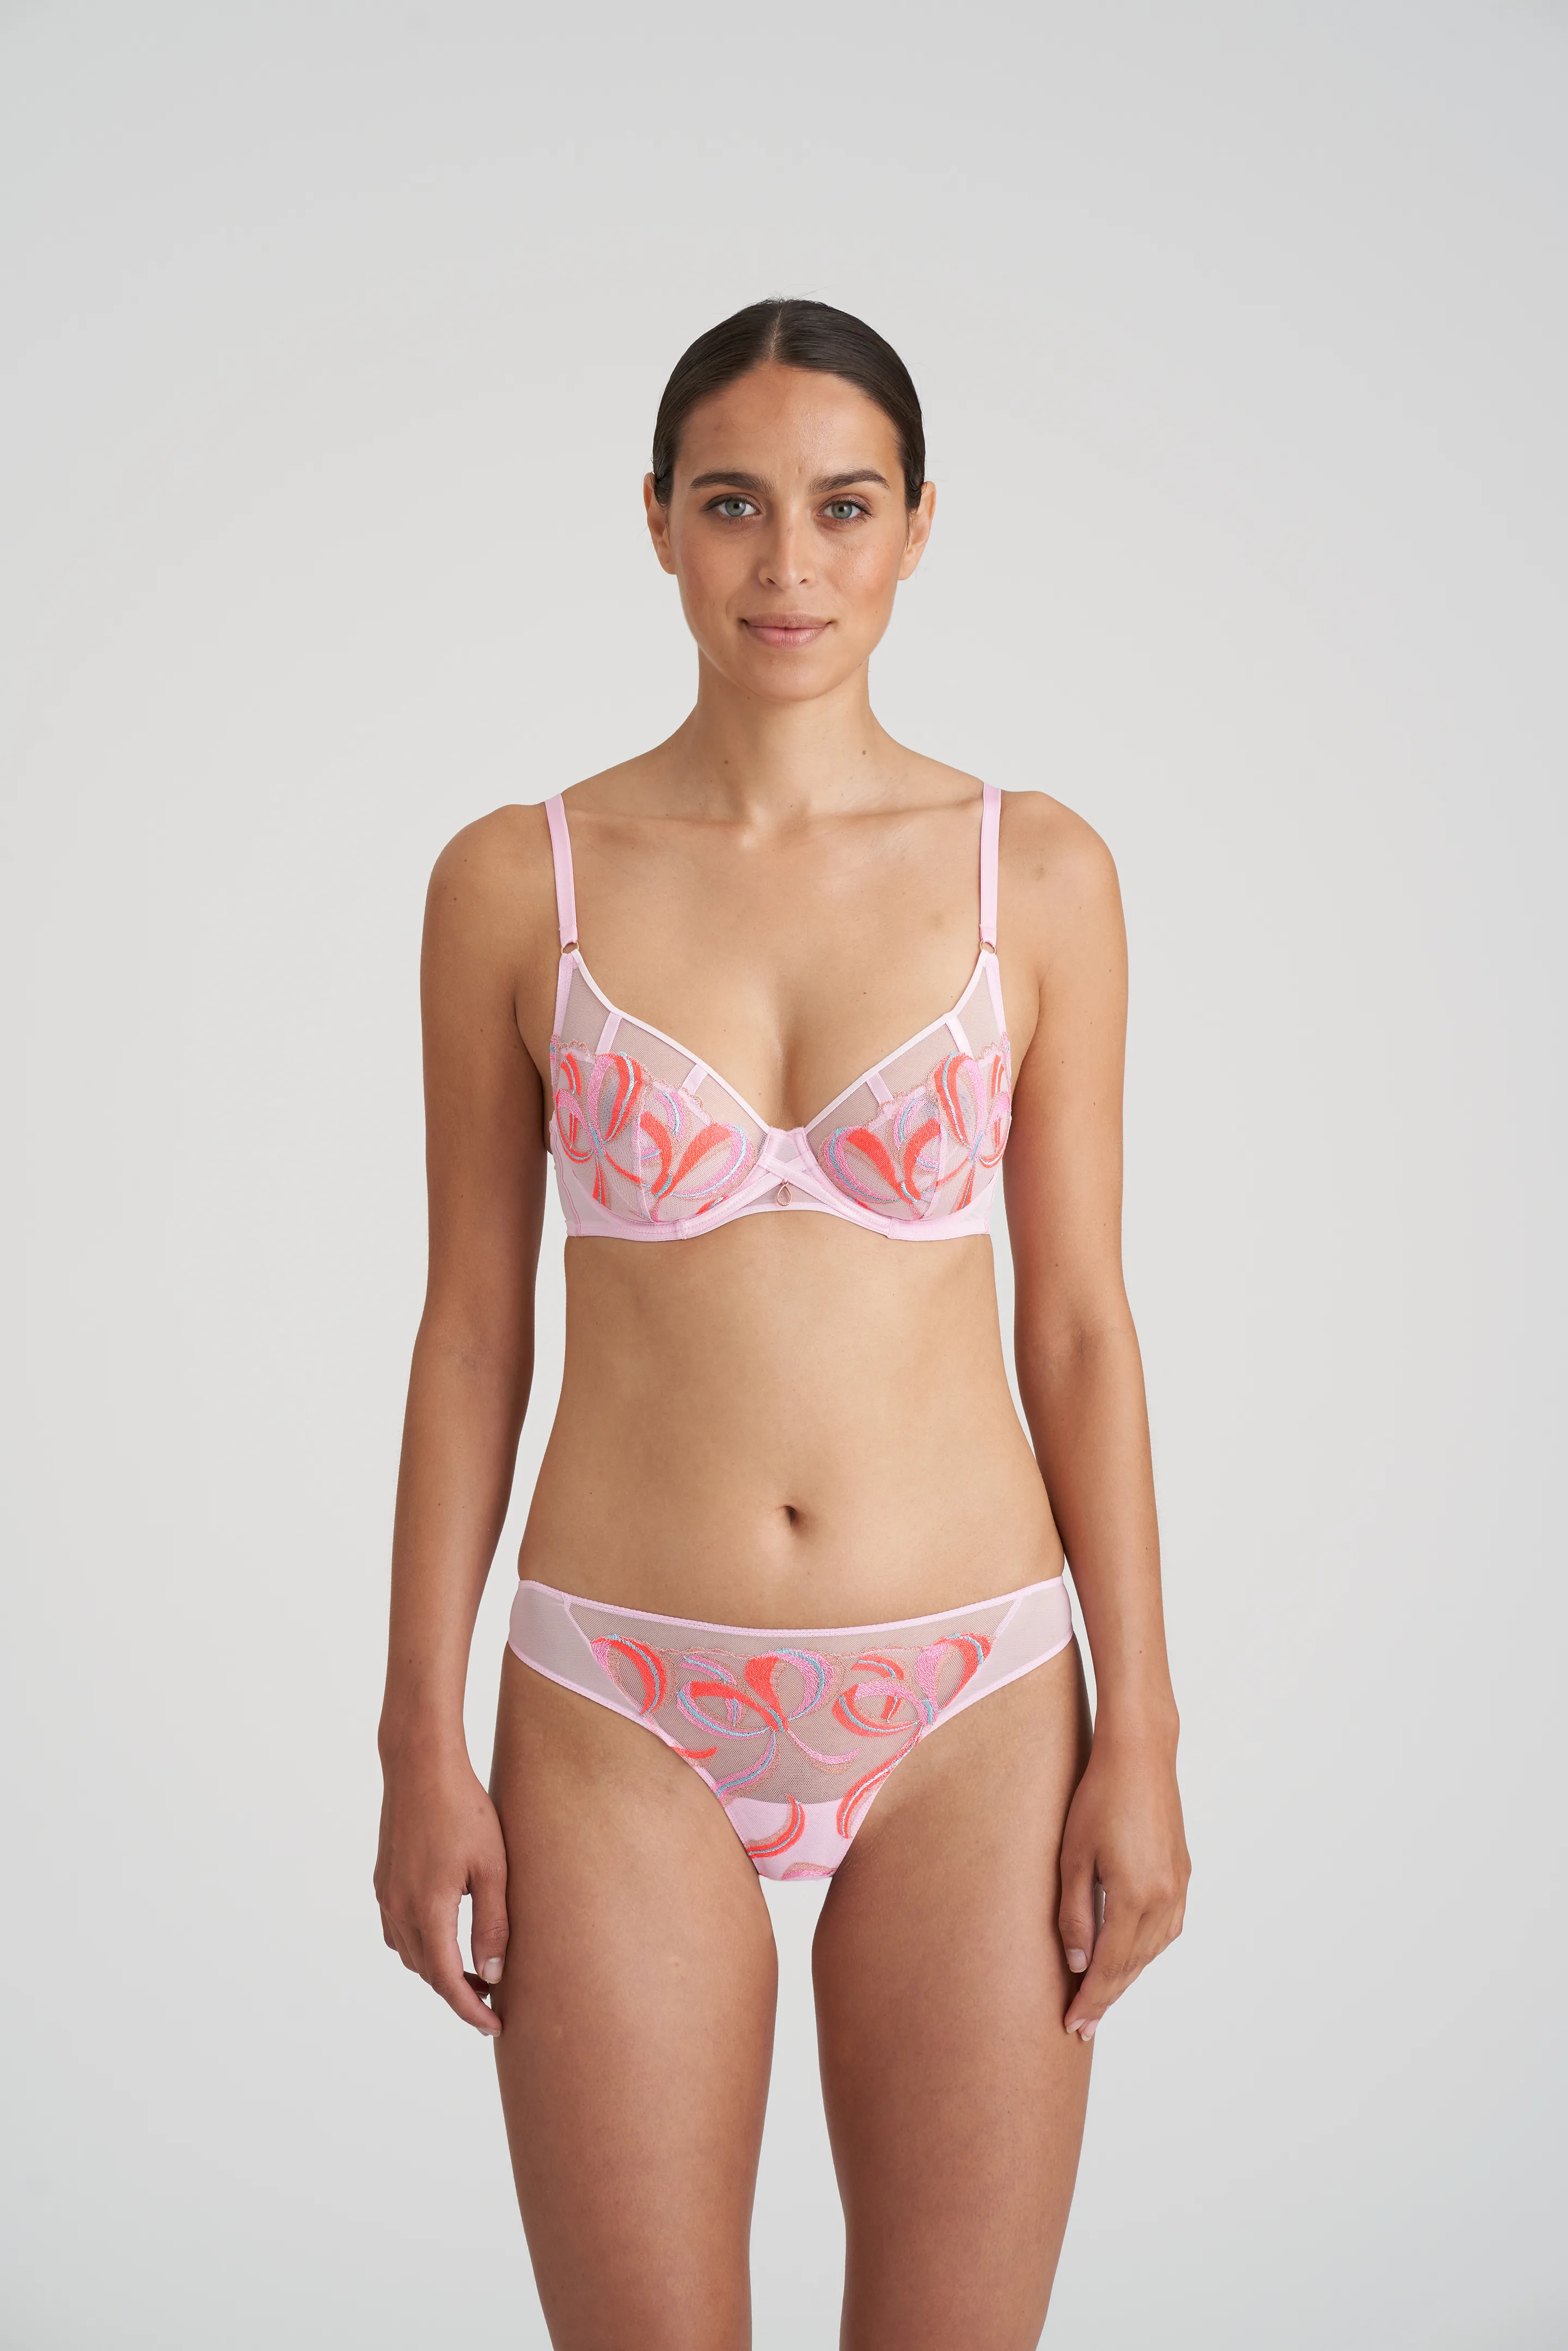 Lightly Lined Embroidered Mesh Bra - Pink Floral Embroidery